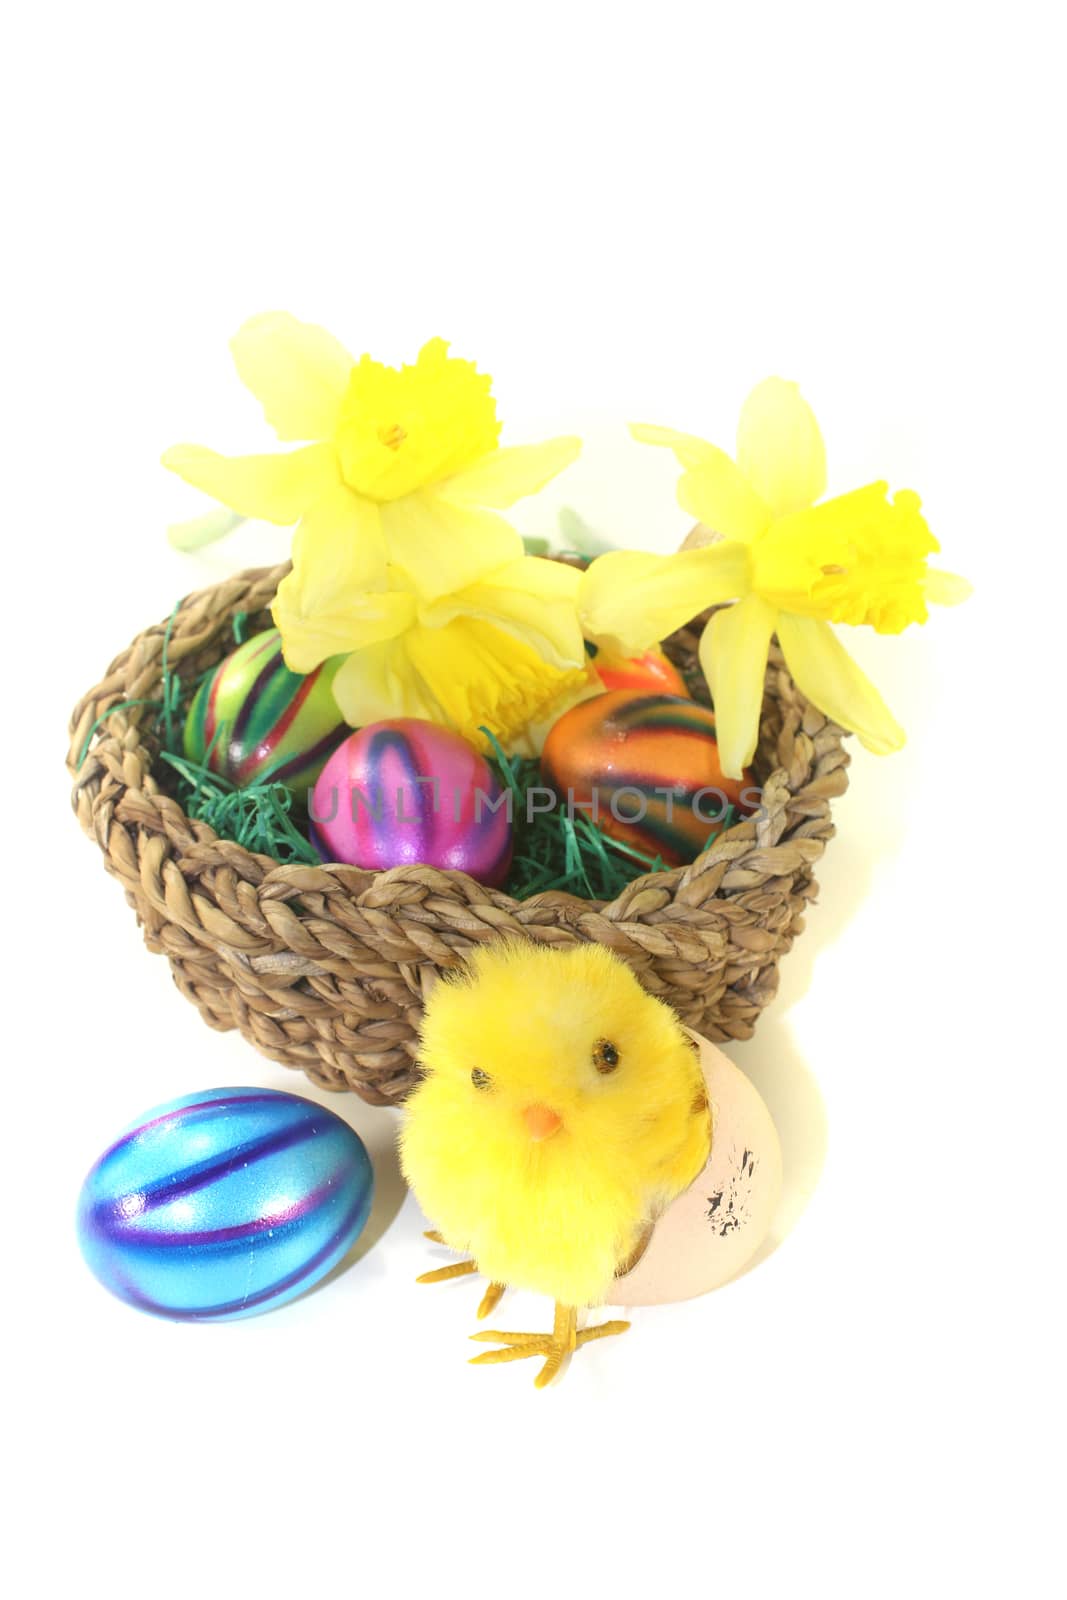 Easter Basket with chick, daffodils and colorful eggs on a light background